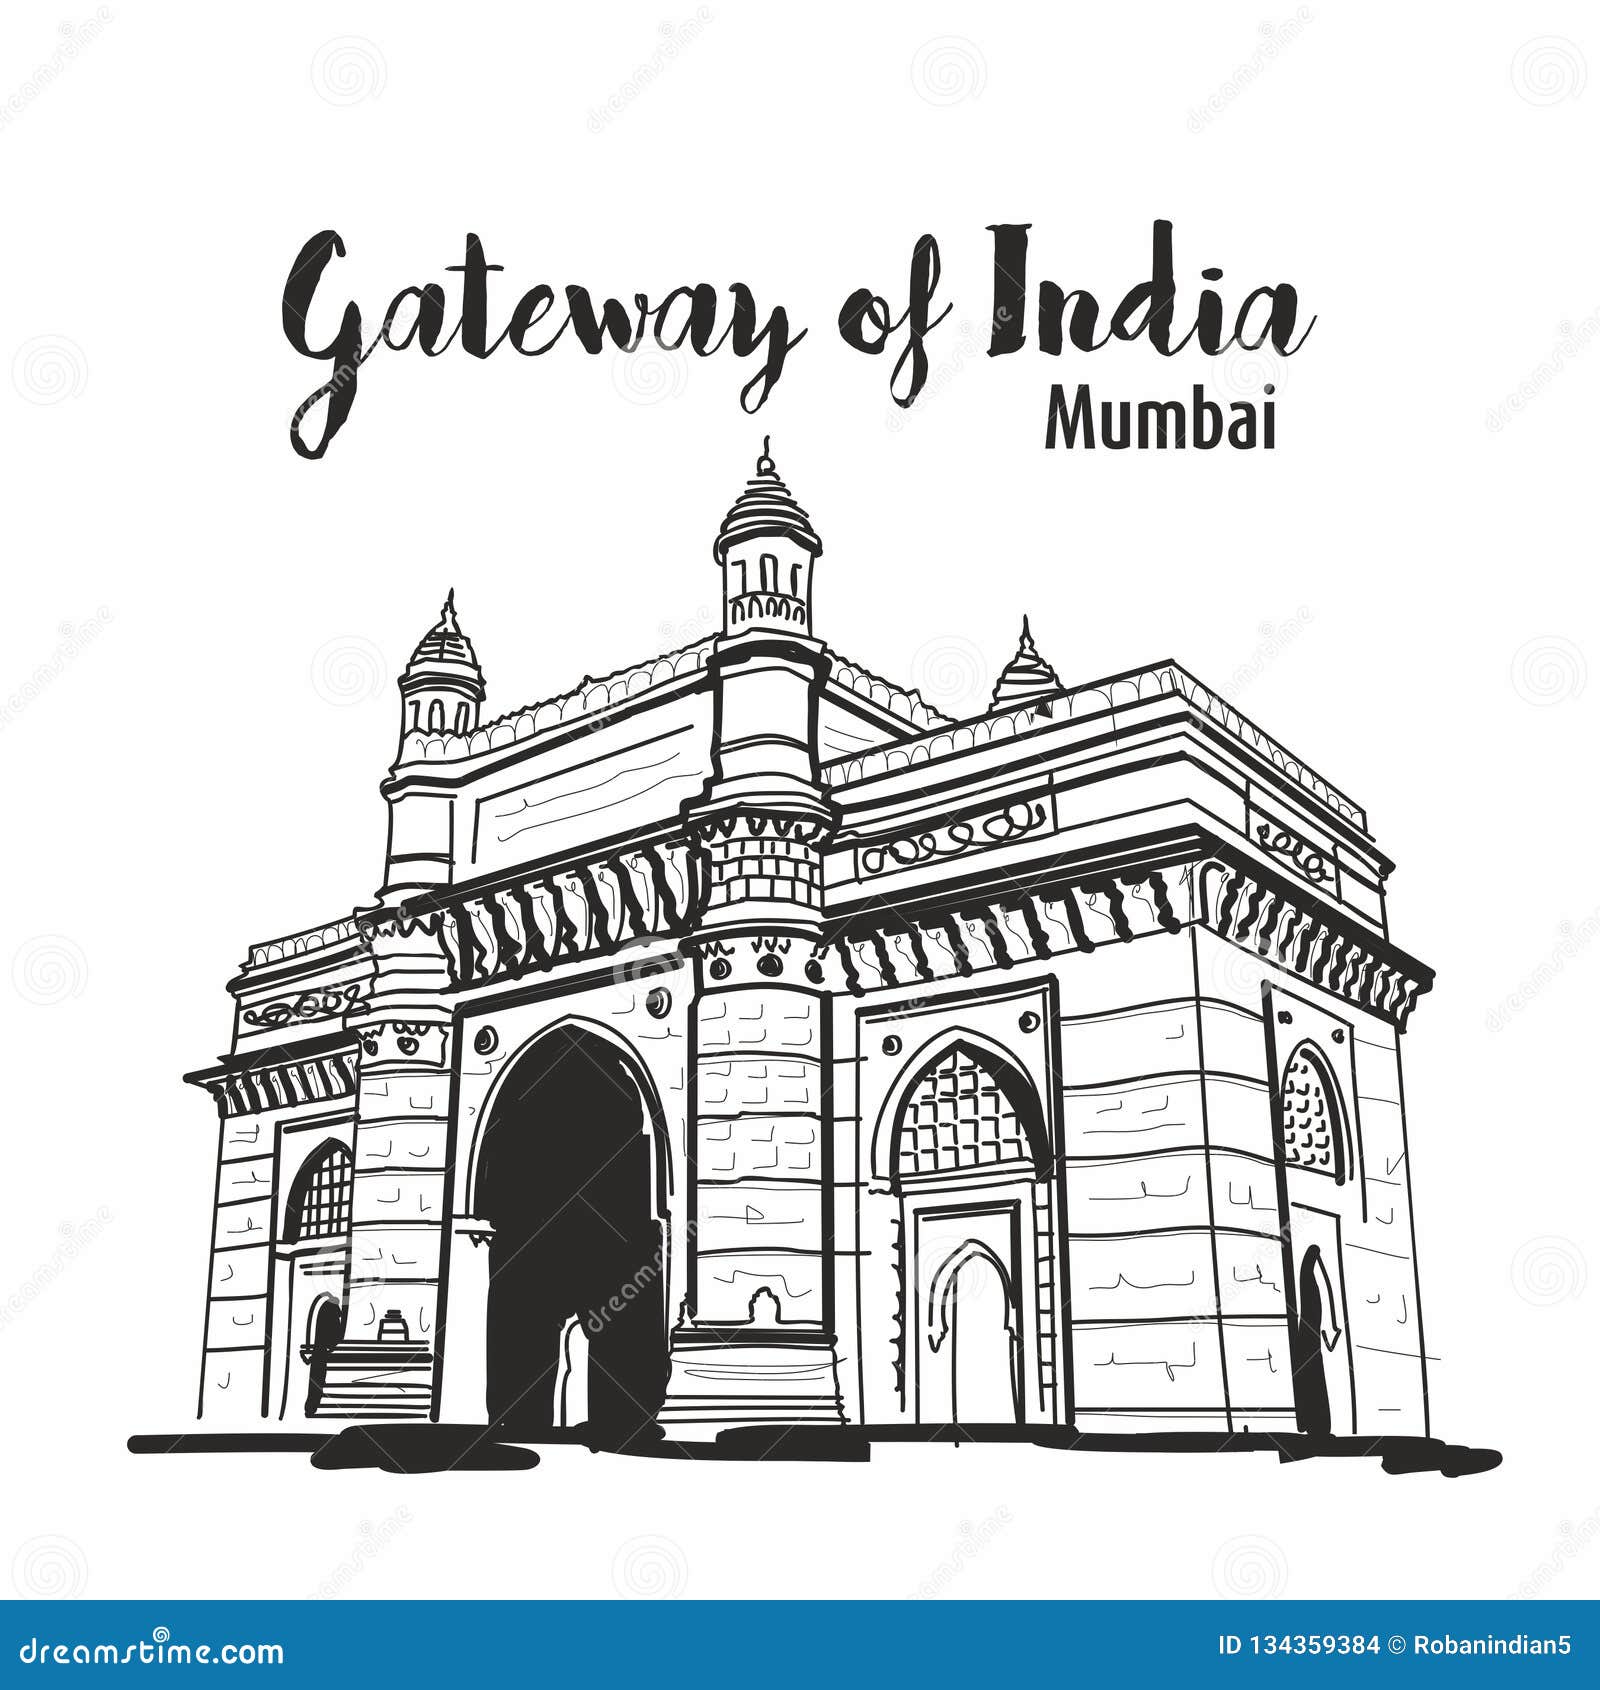 Buy India Sketch Gateway of India Mumbai 8x10 Print of a Online in India   Etsy